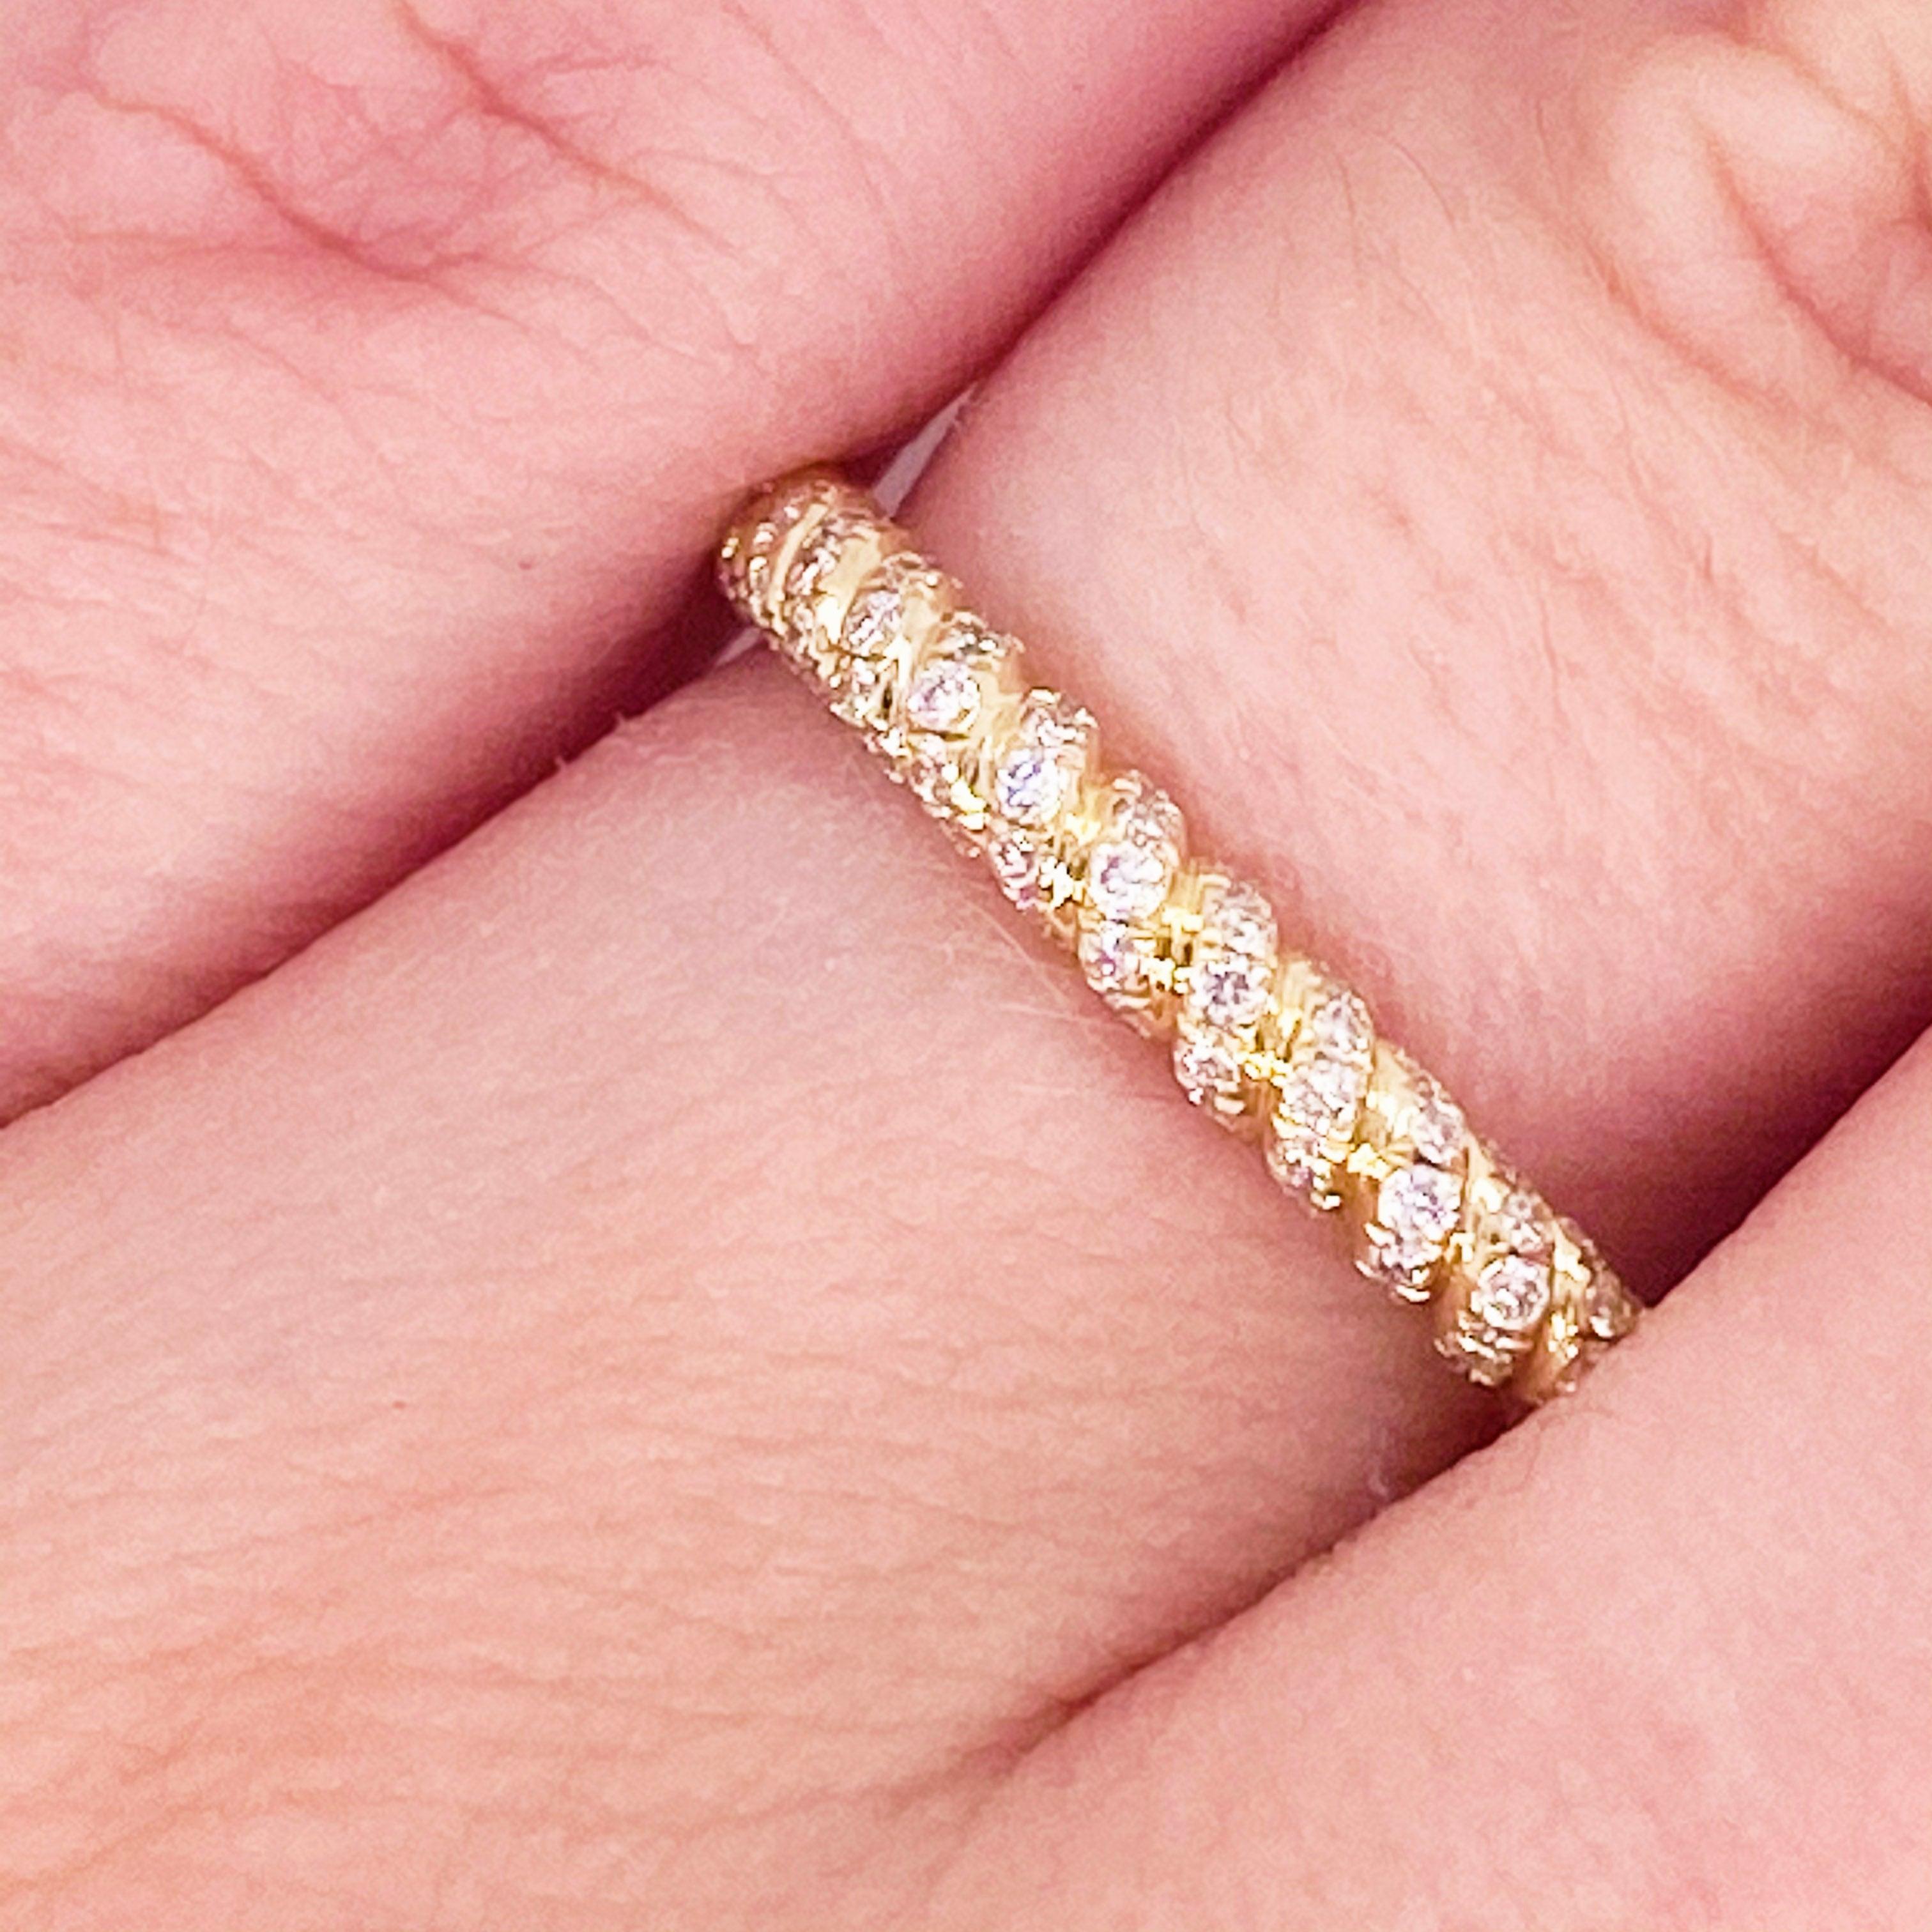 For Sale:  Twisted Diamond Band, 14 Karat Gold, Wedding Band, Twisted Ring, Stackable 2